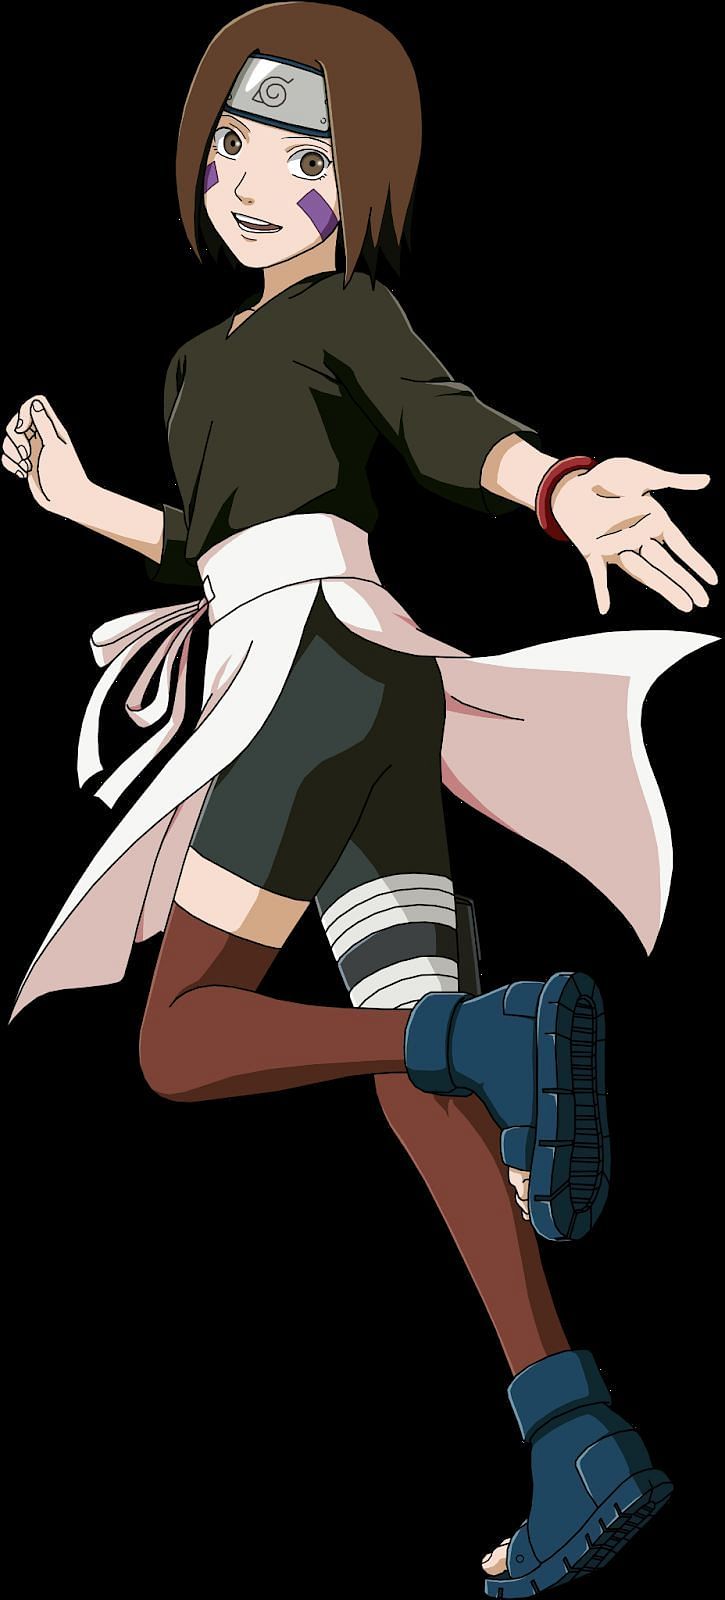 Who is Rin Nohara in Naruto?